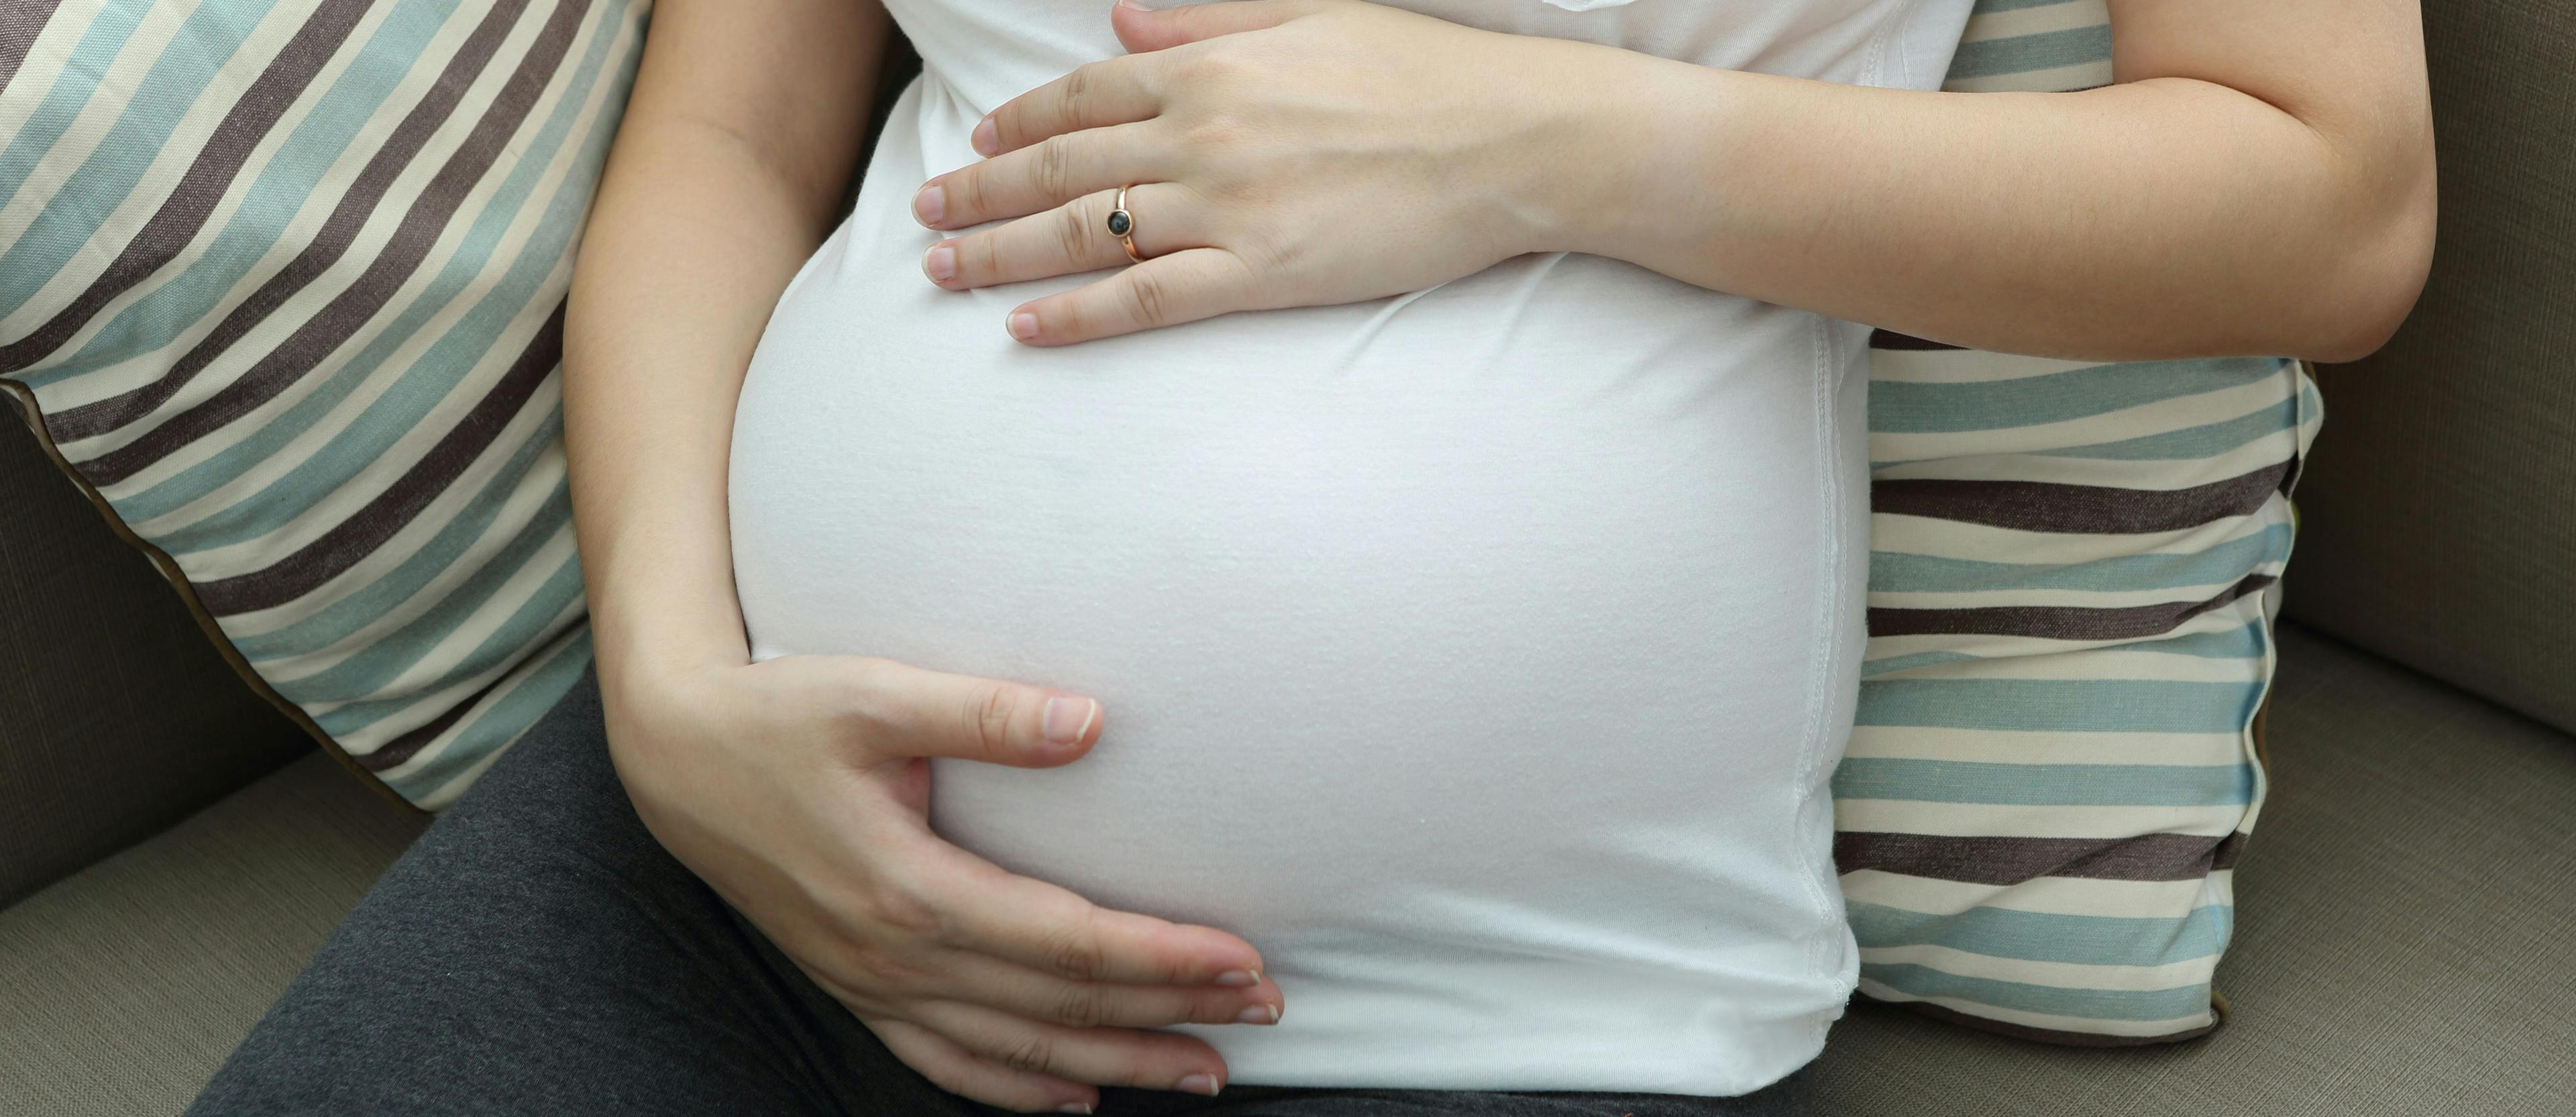 Pregnant Women on Antidepressants Need Not Fear ADHD, Autism Risk